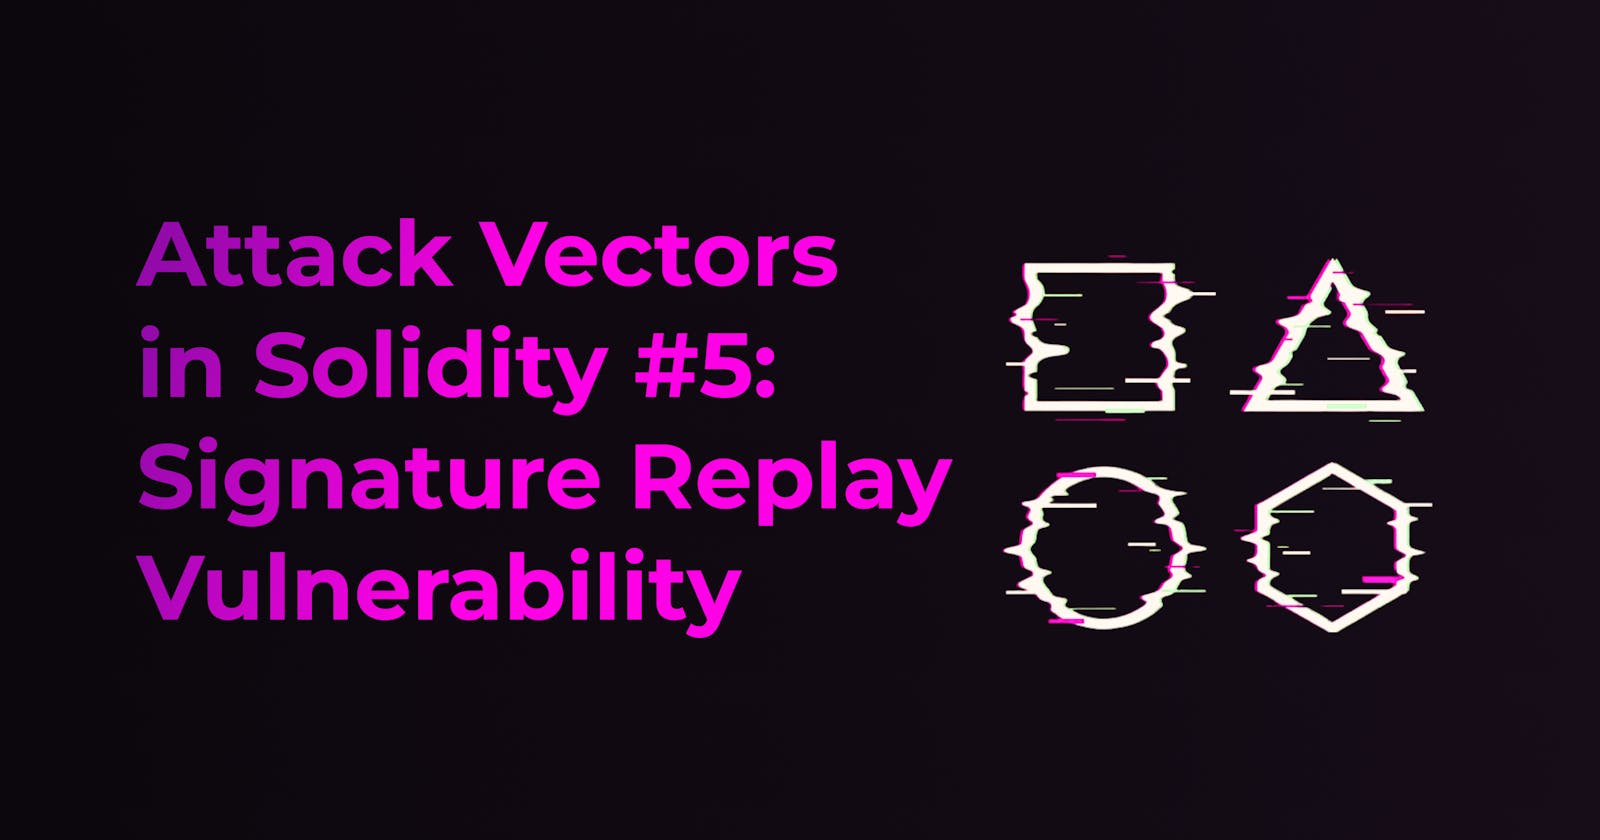 Attack Vectors in Solidity #5: Signature Replay Vulnerability